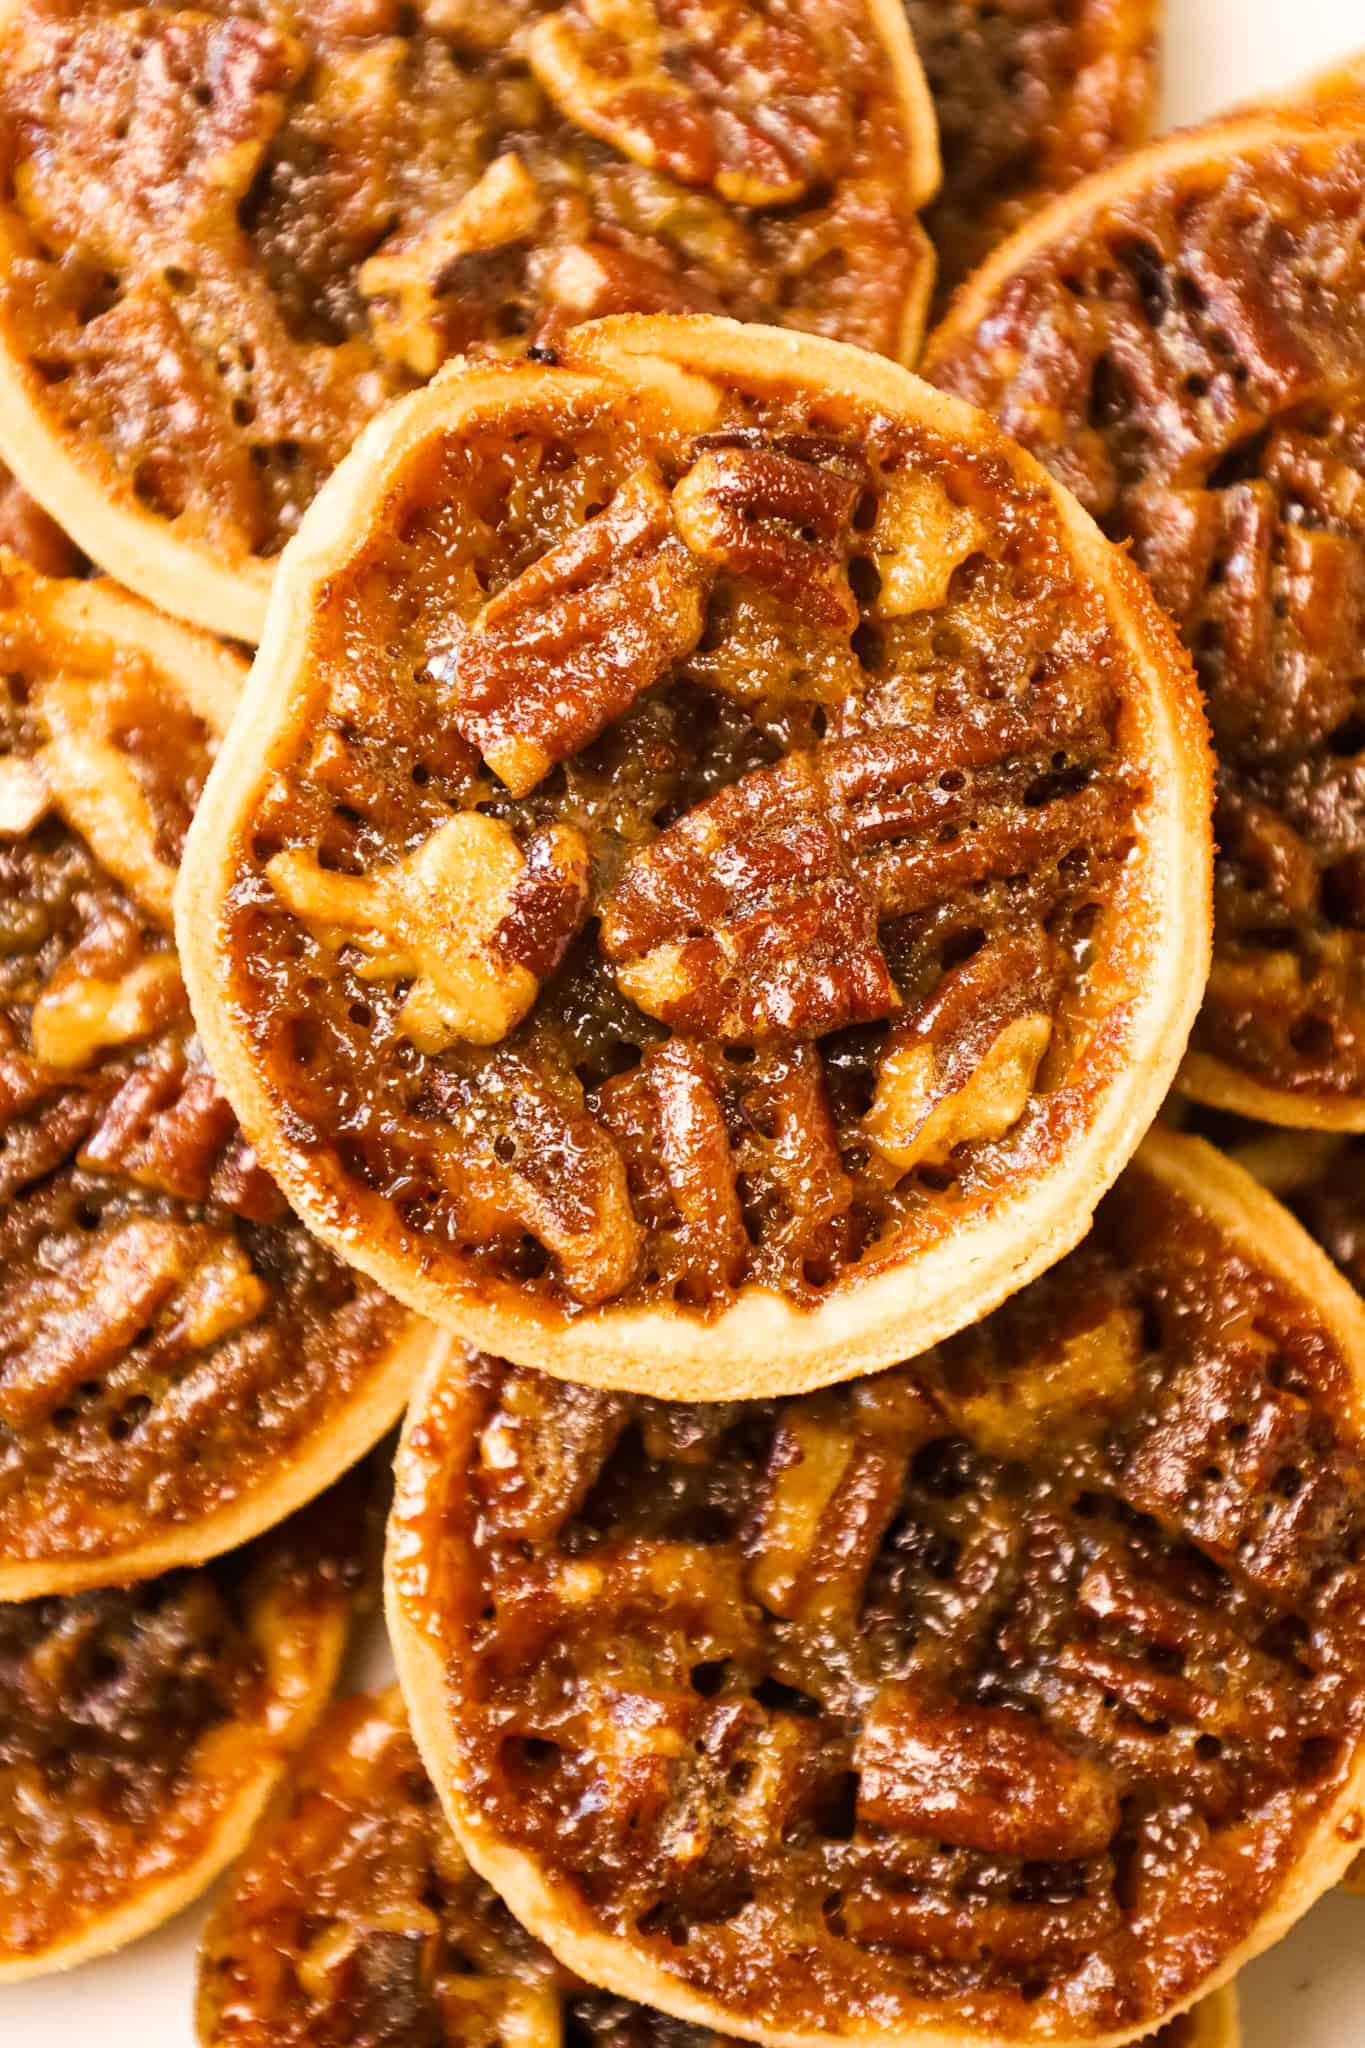 Pecan Tarts are delicious pastries with a sweet caramel and chopped pecan filling.